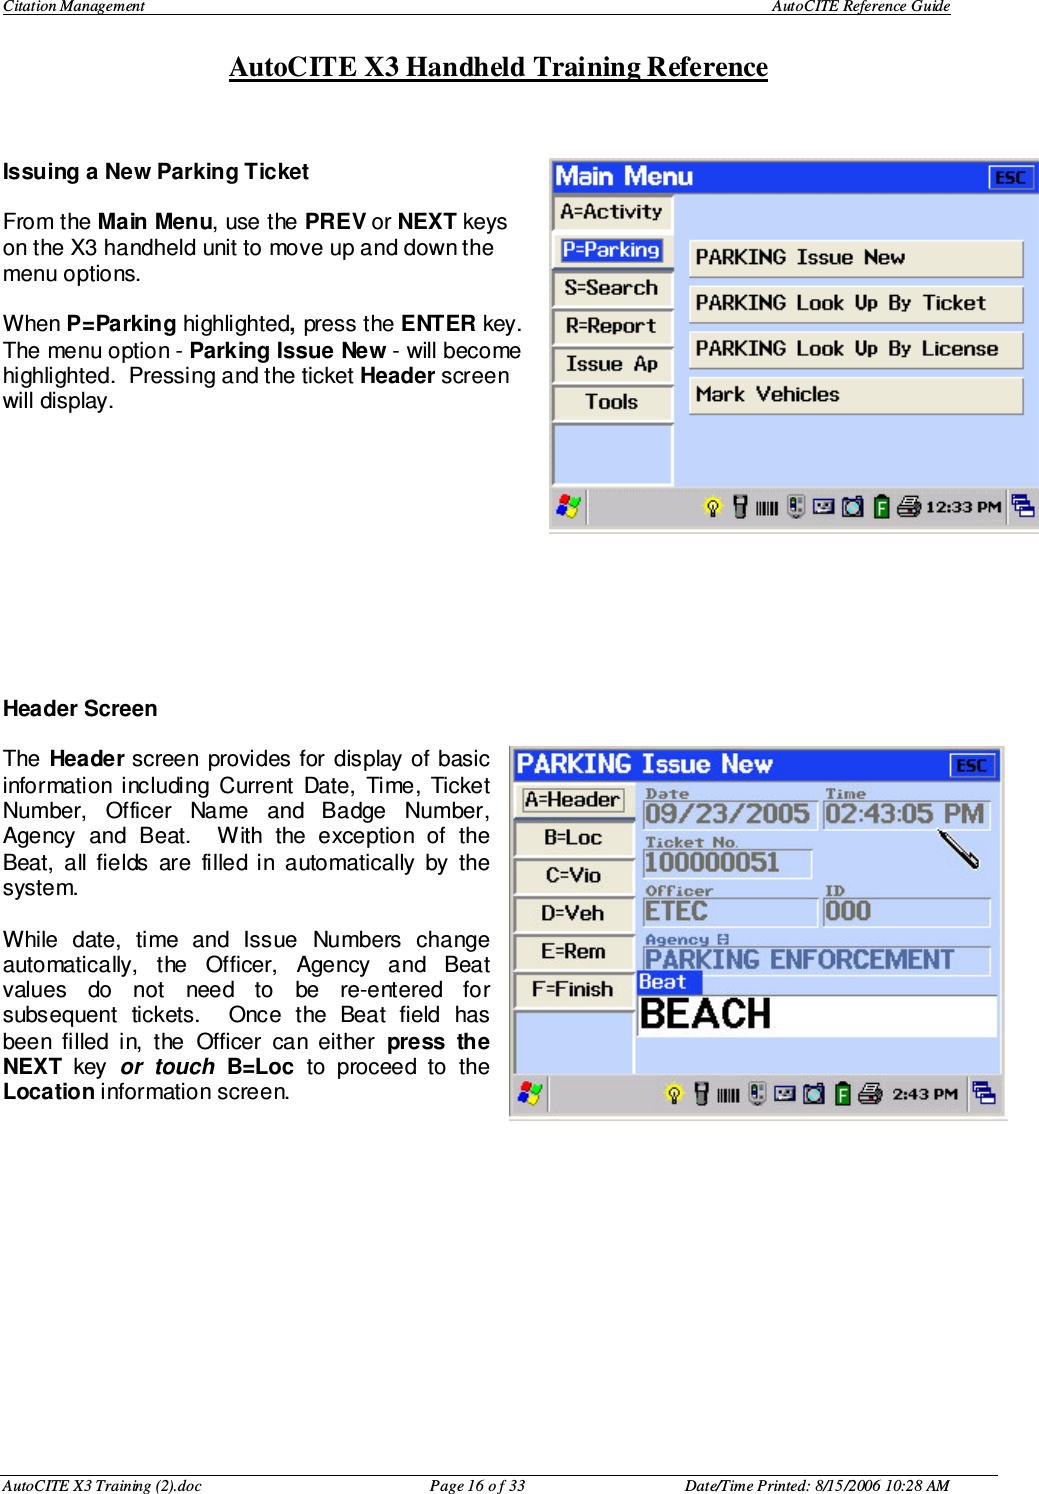 Citation Management    AutoCITE Reference Guide  AutoCITE X3 Handheld Training Reference AutoCITE X3 Training (2).doc  Page 16 o f 33  Date/Time Printed: 8/15/2006 10:28 AM  Issuing a New Parking Ticket  From the Main Menu, use the PREV or NEXT keys on the X3 handheld unit to move up and down the menu options.    When P=Parking highlighted, press the ENTER key.  The menu option - Parking Issue New - will become highlighted.  Pressing and the ticket Header screen will display.              Header Screen  The  Header screen provides for  display of  basic information  including  Current  Date,  Time,  Ticket Number,  Officer  Name  and  Badge  Number, Agency  and  Beat.    With  the  exception  of  the Beat,  all  fields  are  filled  in  automatically  by  the system.    While  date,  time  and  Issue  Numbers  change automatically,  the  Officer,  Agency  and  Beat values  do  not  need  to  be  re-entered  for subsequent  tickets.    Once  the  Beat  field  has been  filled  in,  the  Officer  can  either  press  the NEXT  key  or  touch B=Loc  to  proceed  to  the Location information screen. 